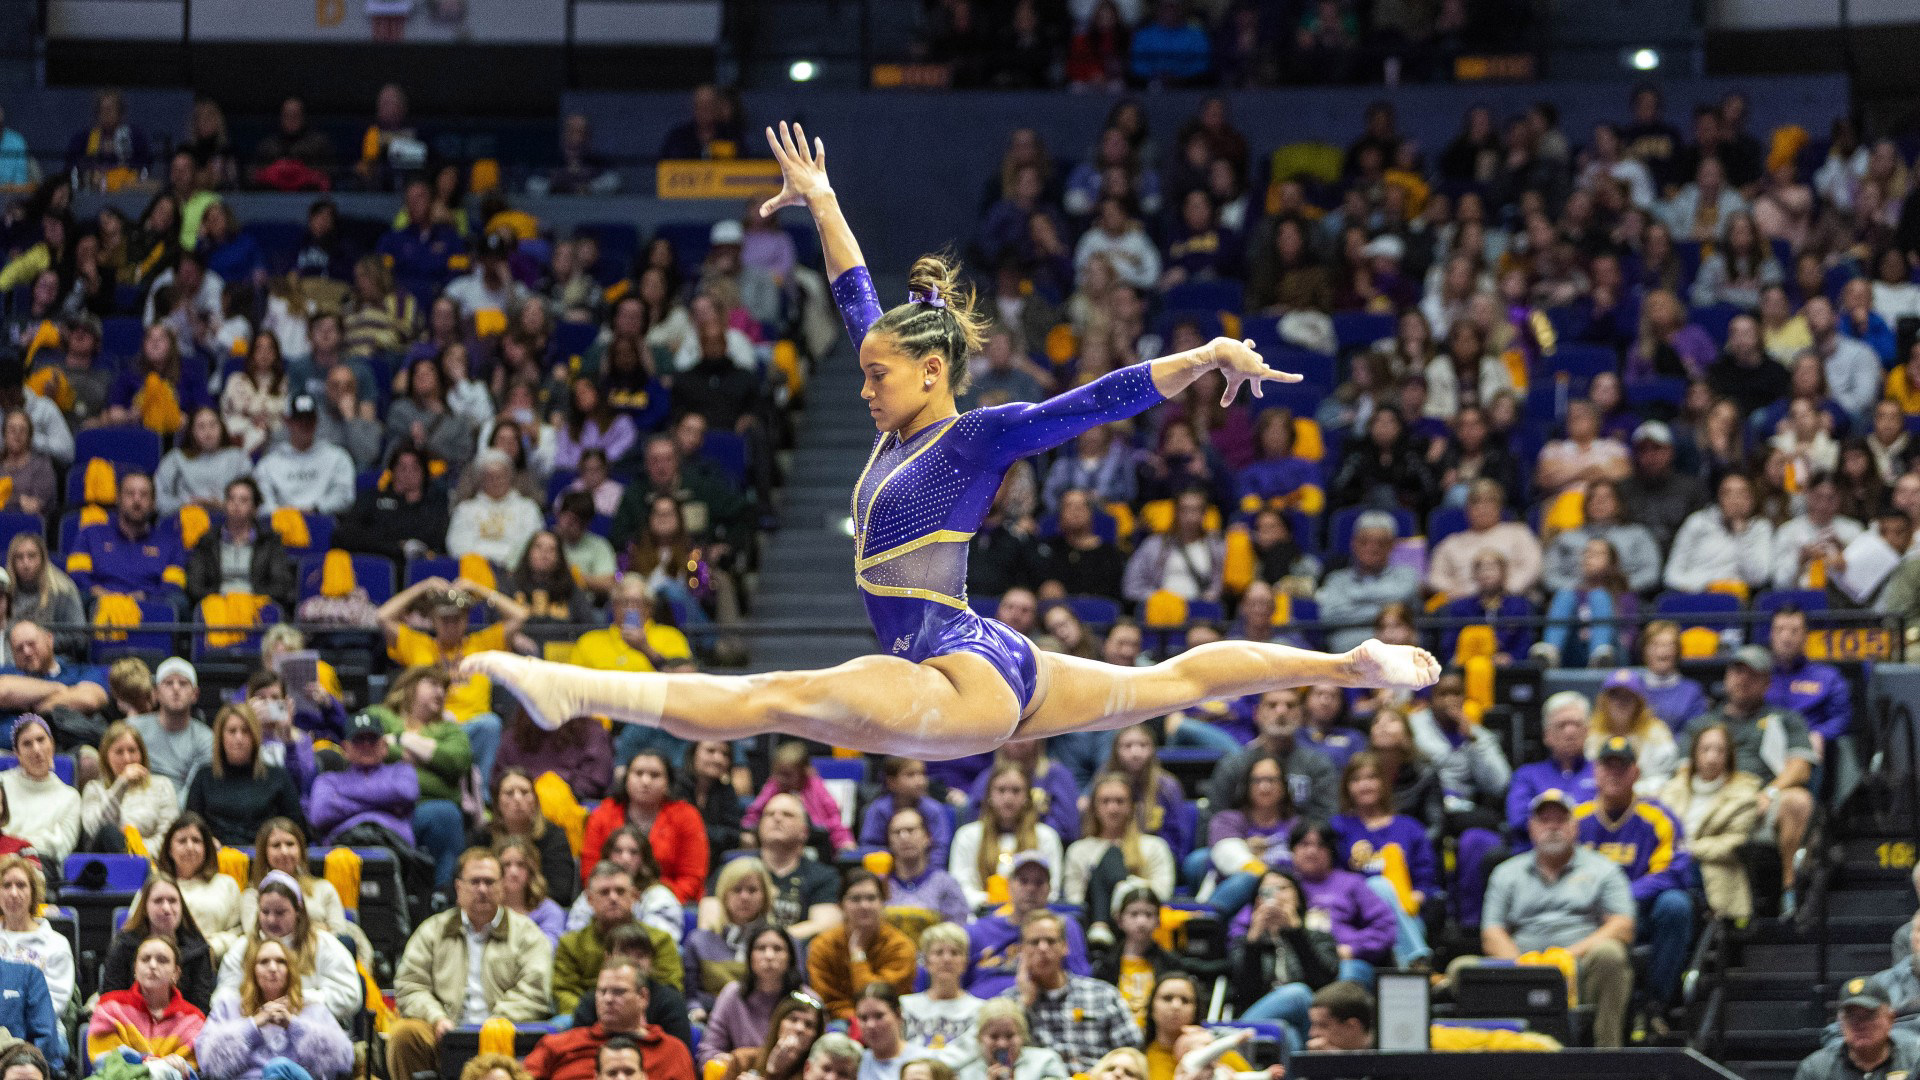 NCAA gymnastics schedule How to watch LSU, others at Sprouts Farmers